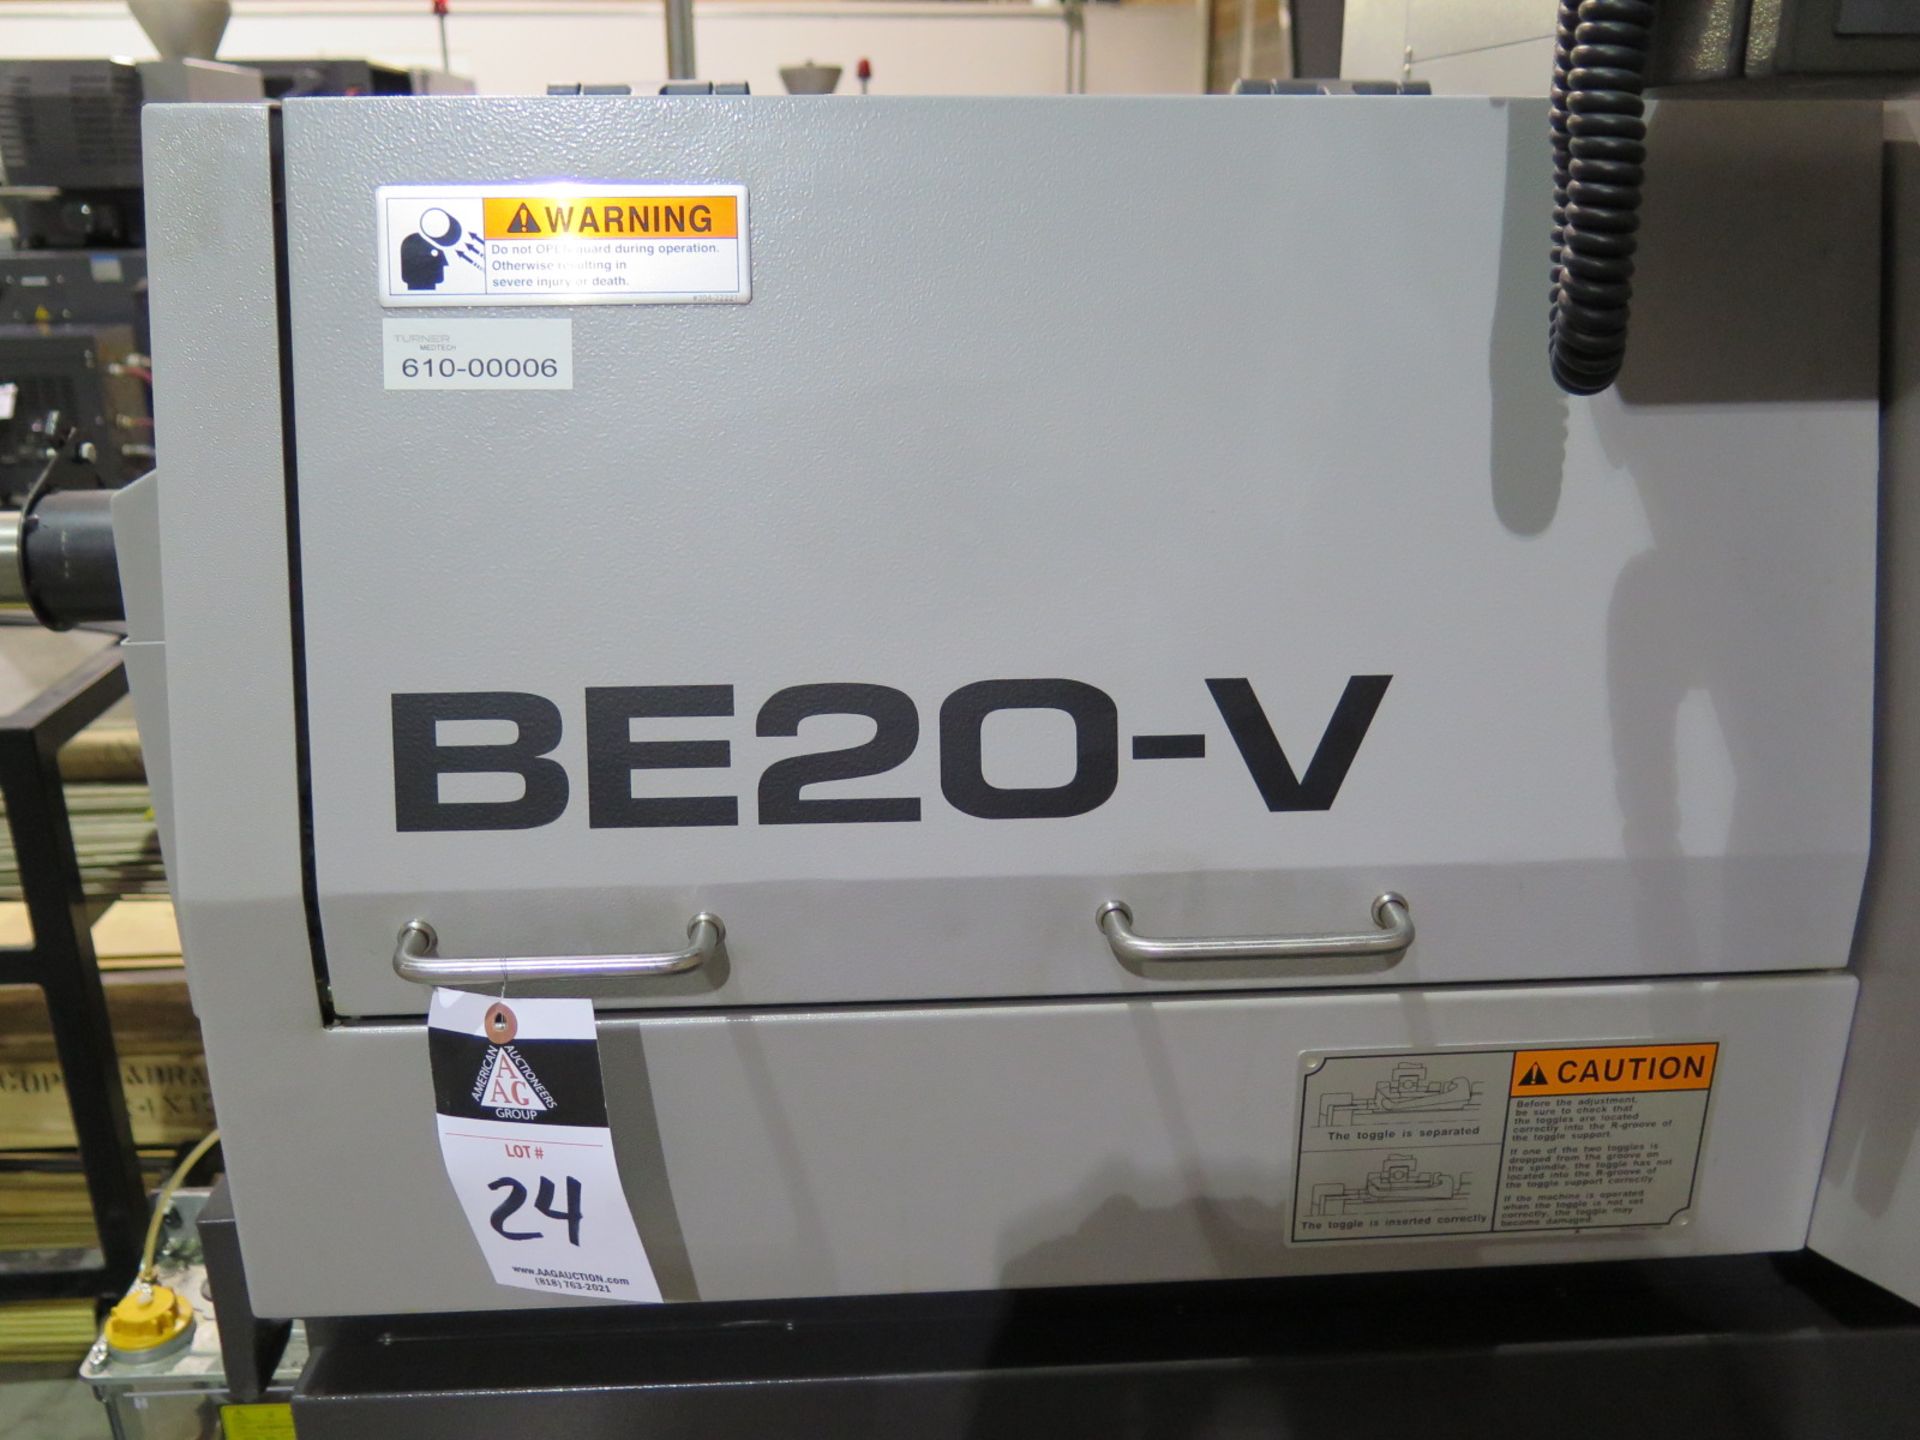 2011 Tsugami BE20-V Twin Spindle 5-Axis Live Tooling CNC Screw Machine s/n 6015 w/ Fanuc Series - Image 4 of 16